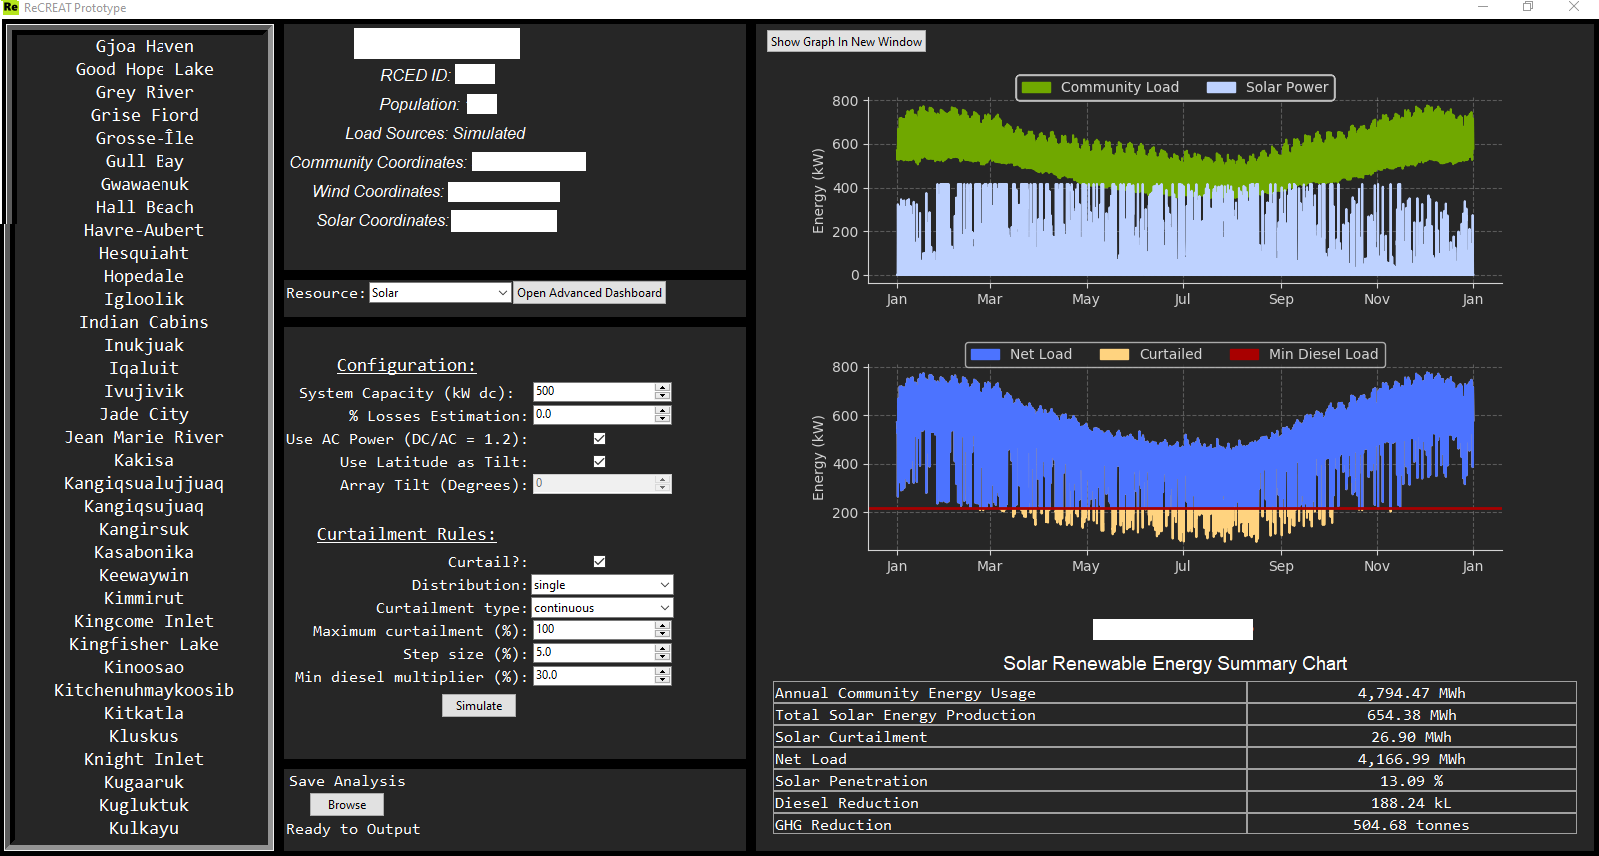 Snapshot of tool output for modeled solar analysis for a single community, including graphical results and summary of high-level results.